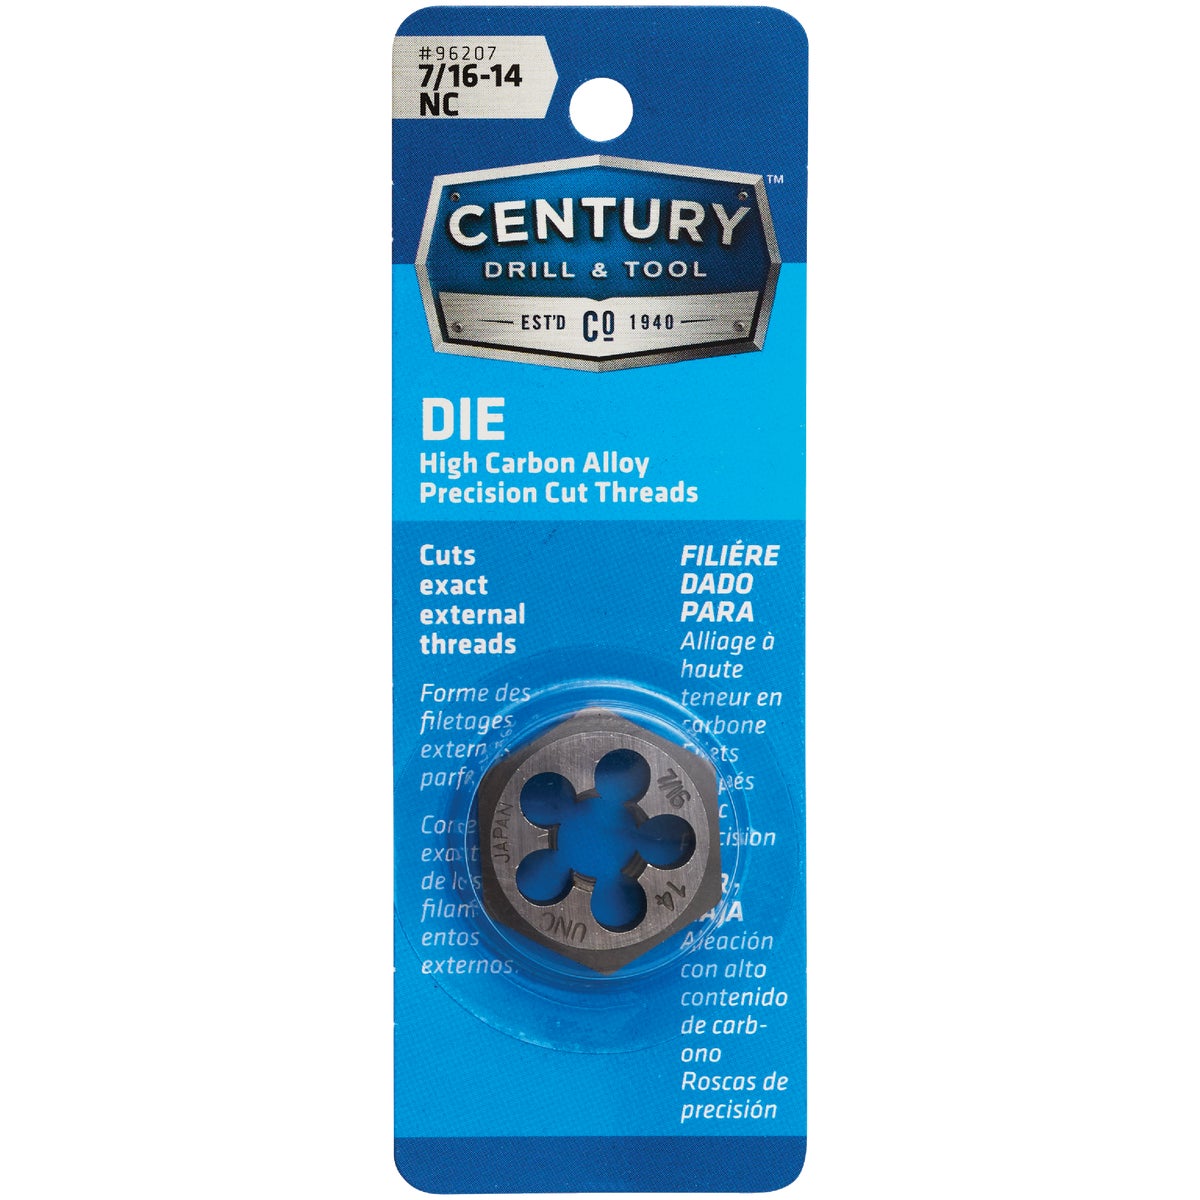 Century Drill & Tool 7/16-14 National Coarse 1 In. Across Flats Fractional Hexagon Die